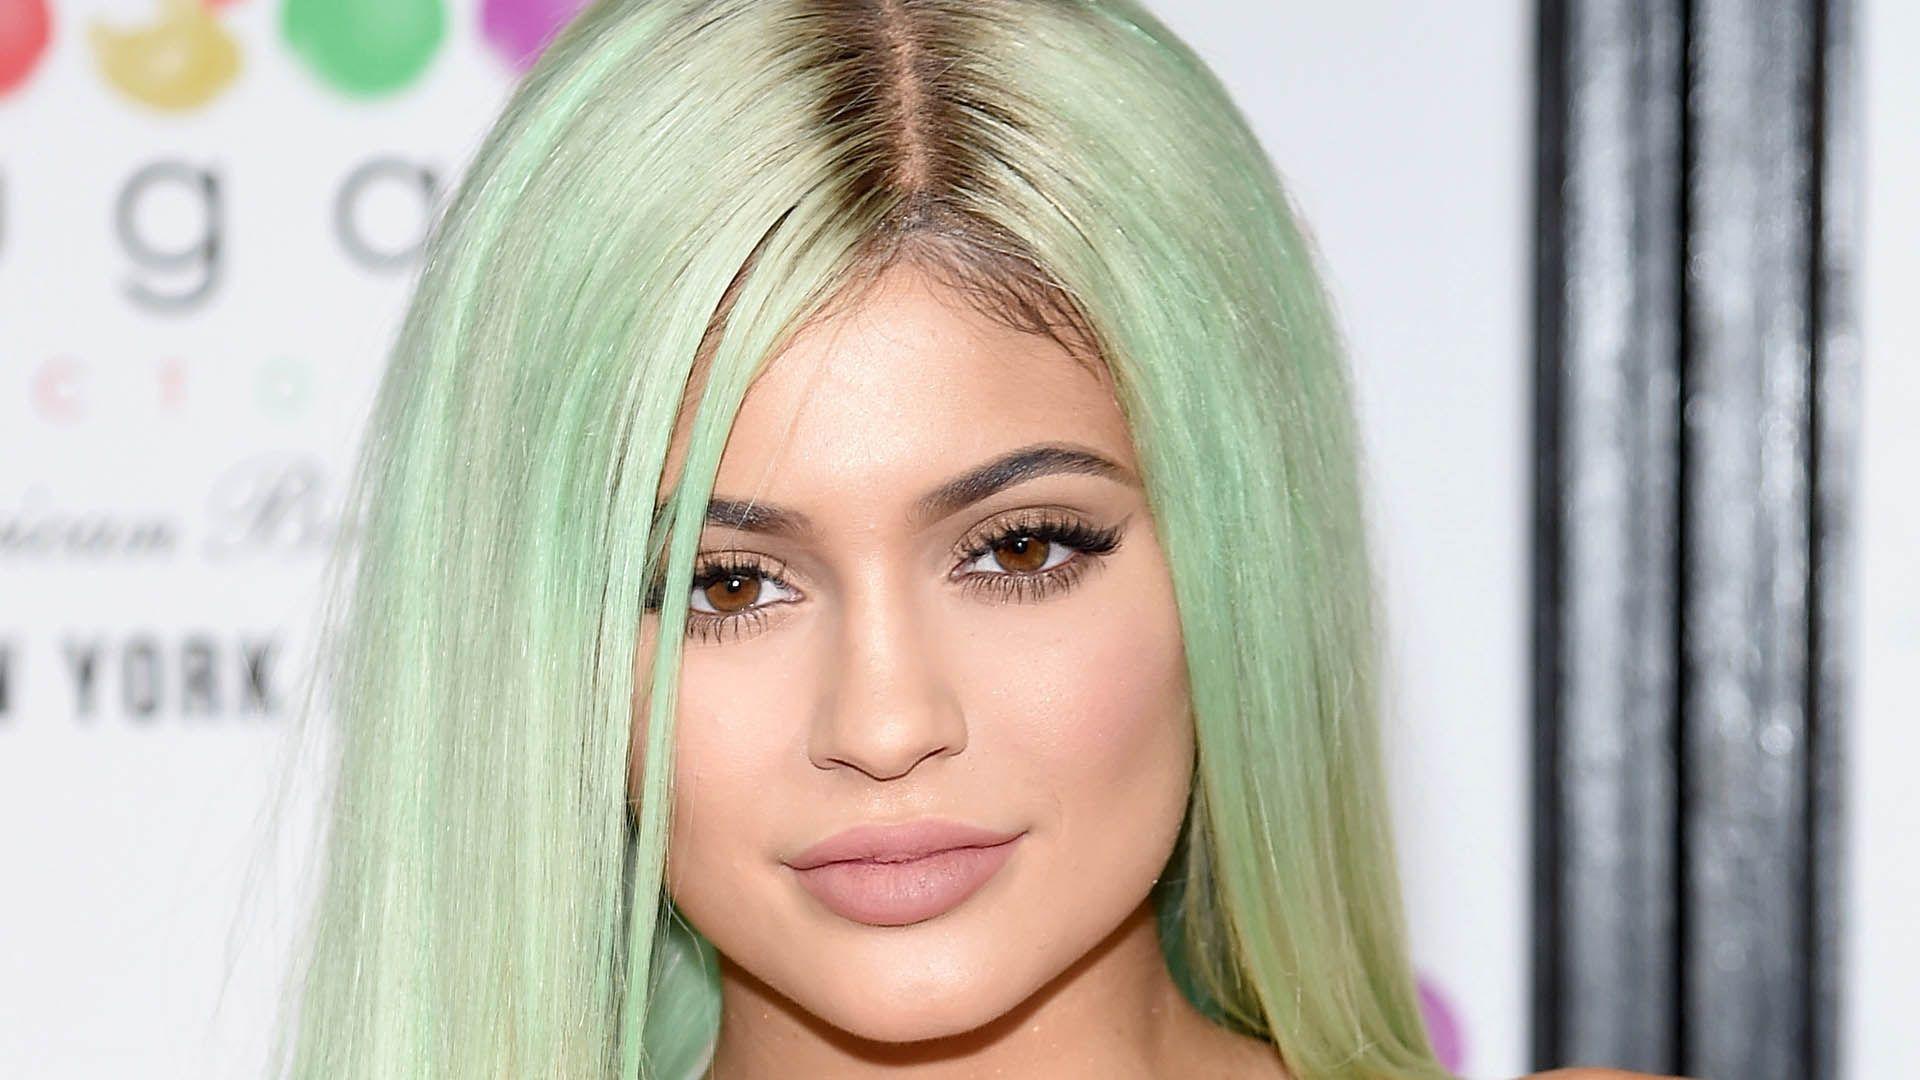 Kylie Jenner Wallpaper High Quality